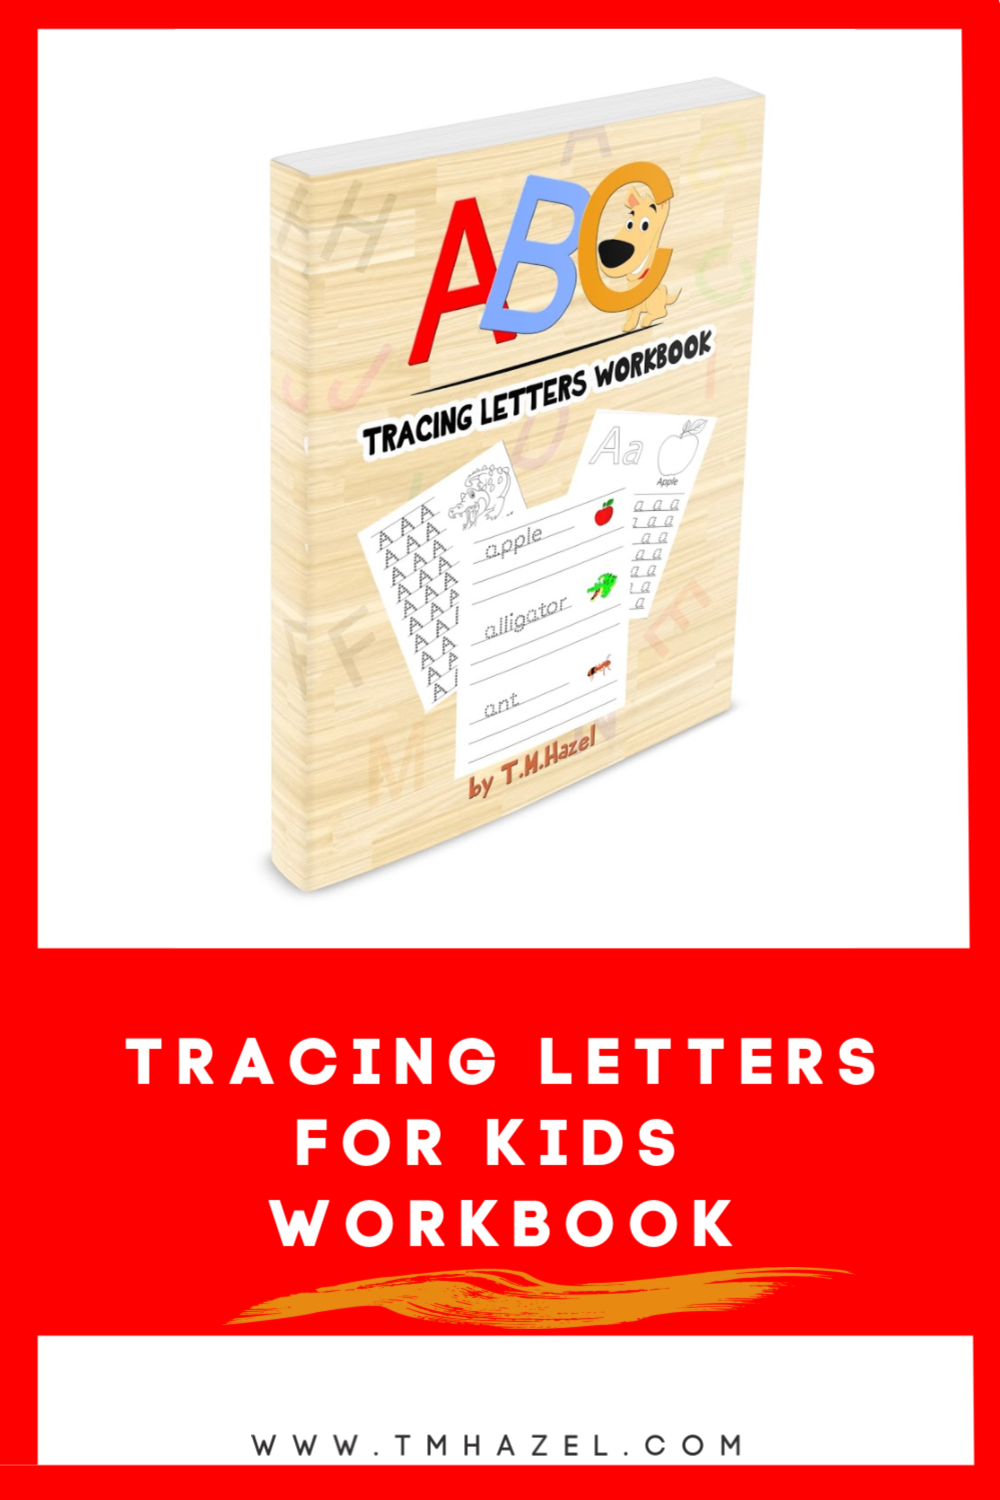 tracing letters workbook